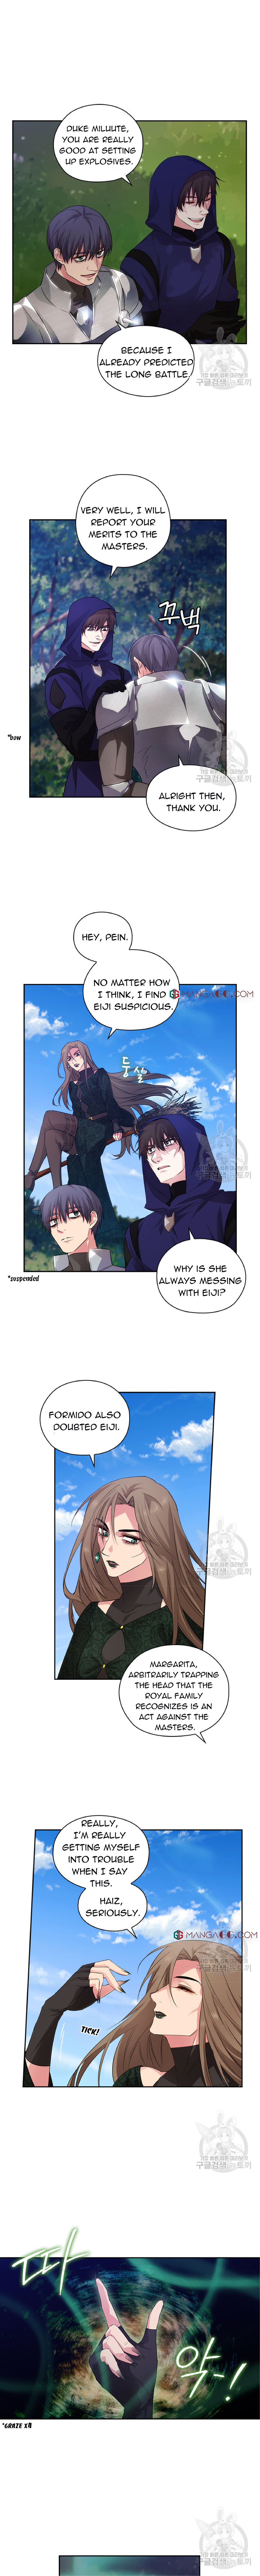 Reminiscence Adonis - Page 2